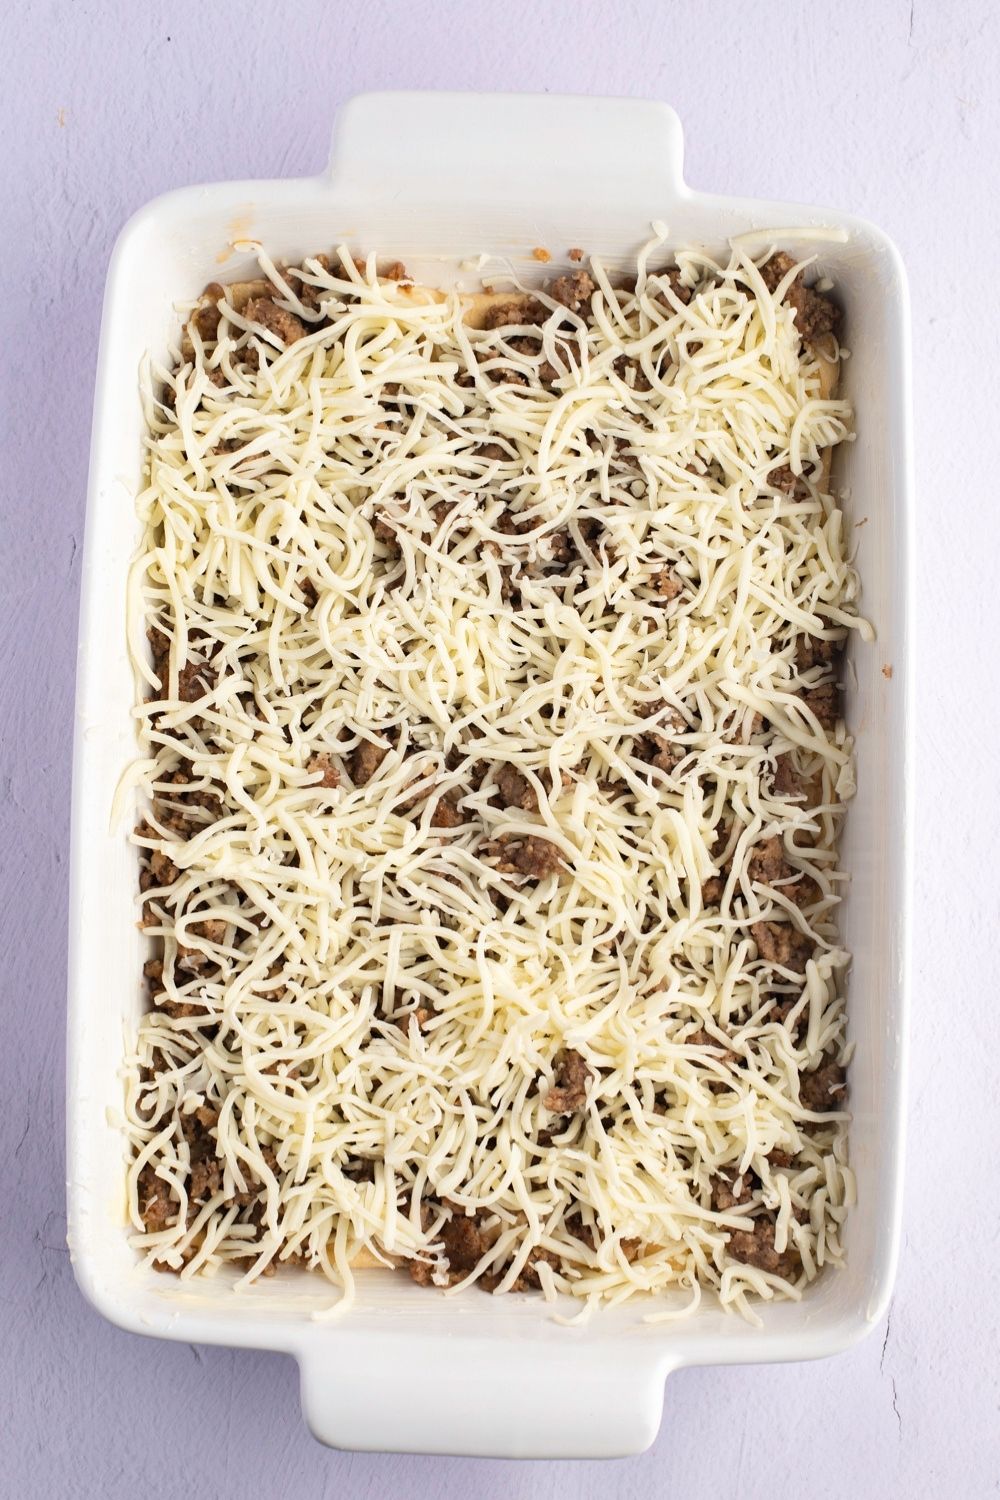 Ground Pork Sausage and Shredded Cheese in a Casserole